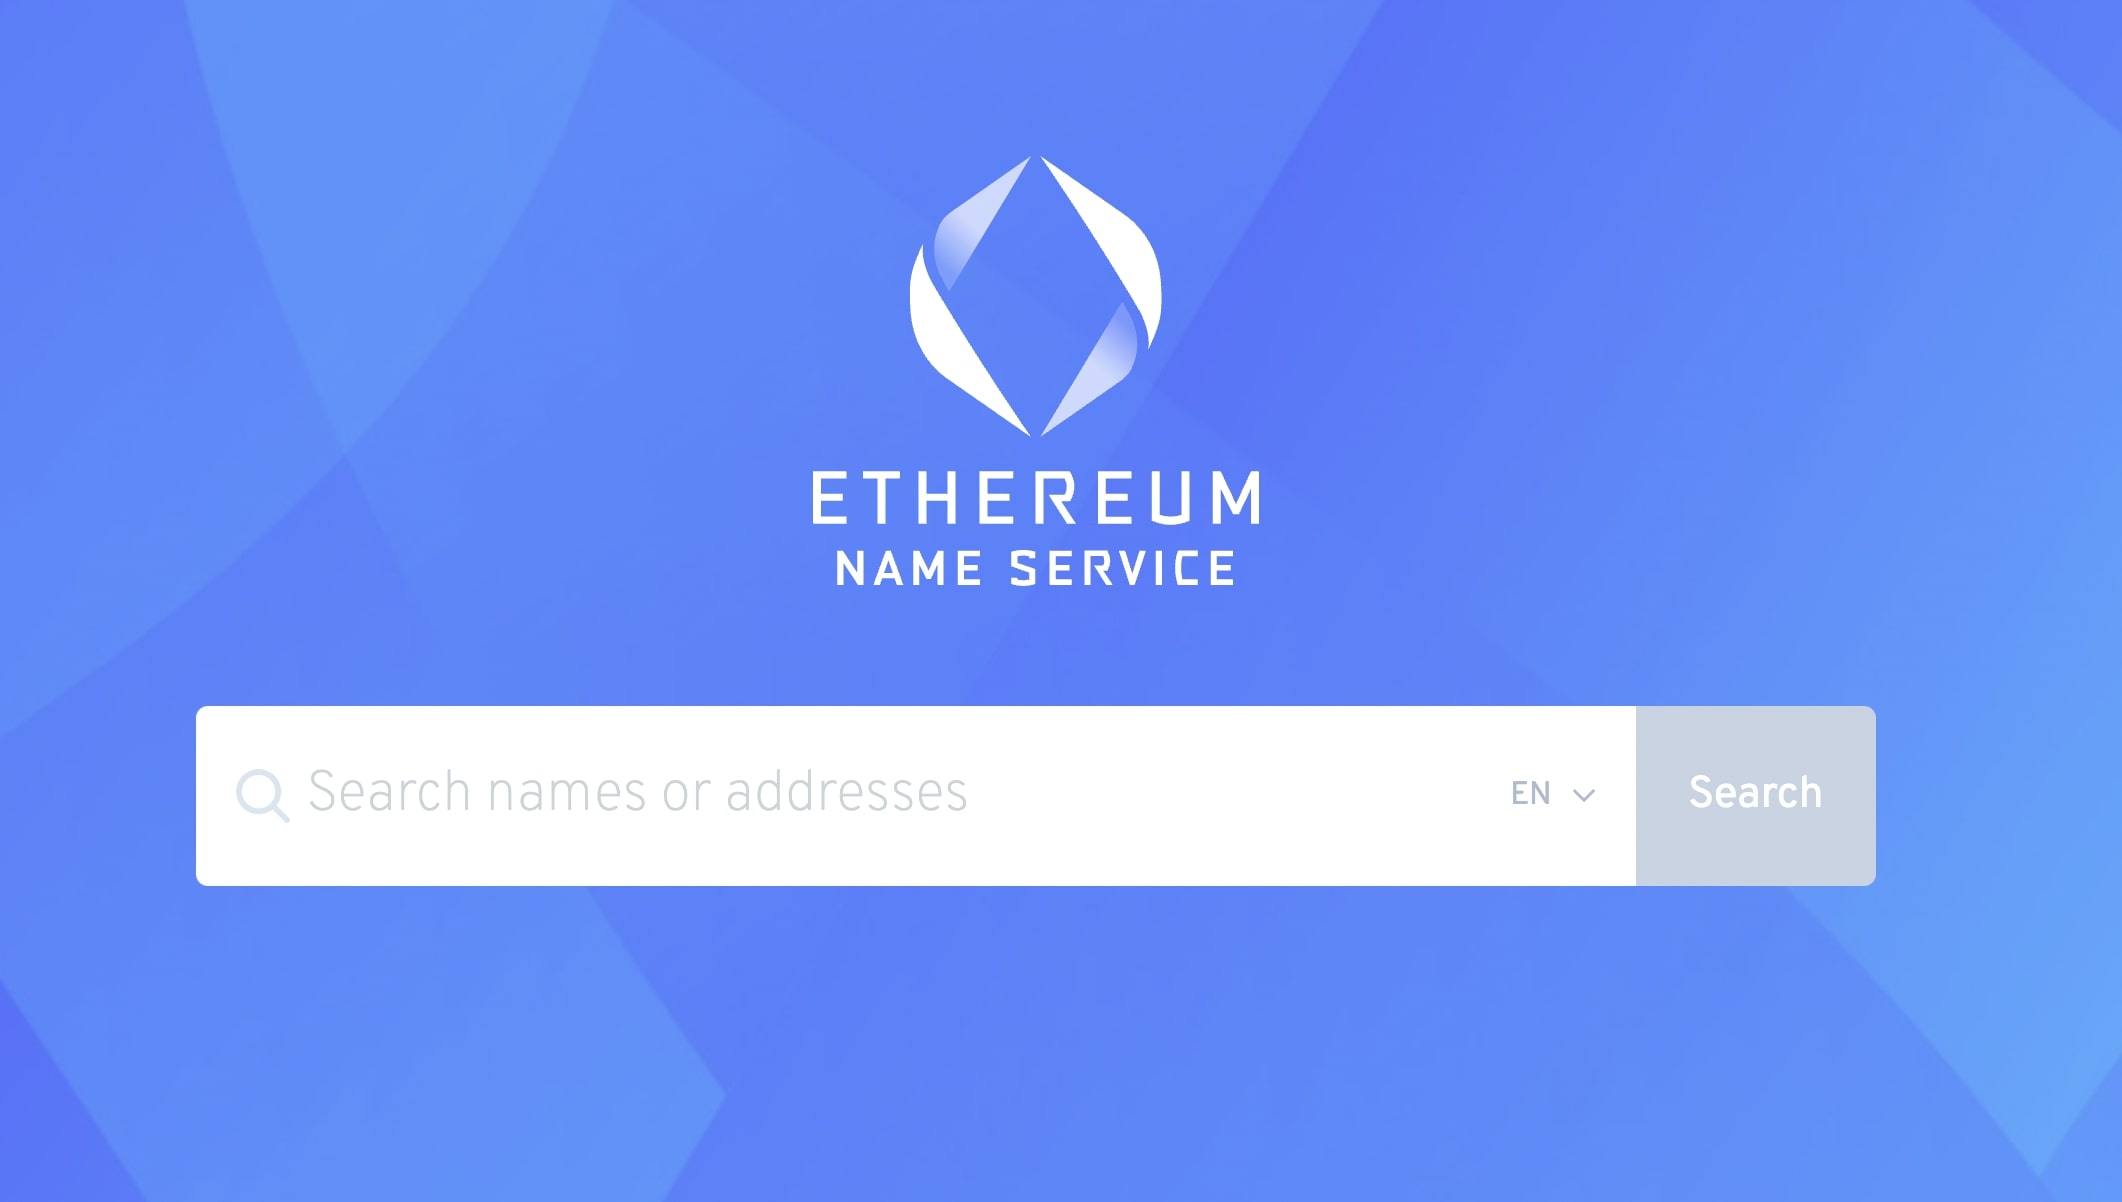 The Ethereum Name Service ENS app